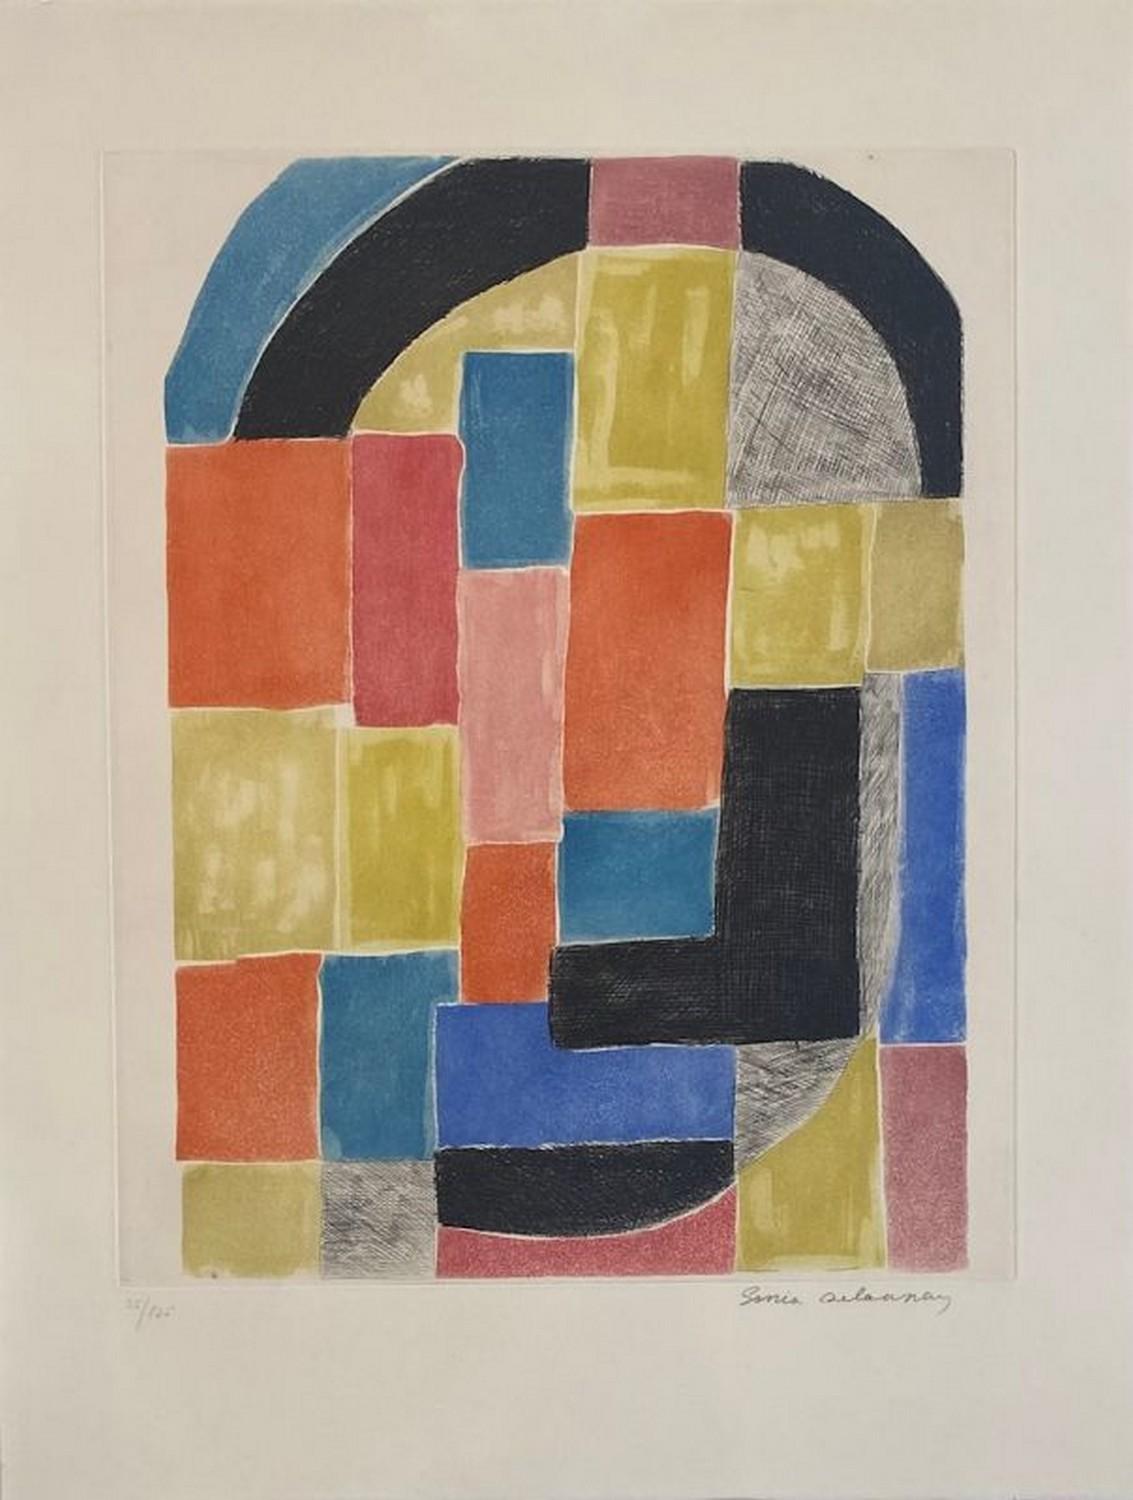 Abstract Print Sonia Delaunay - Cathédrale 